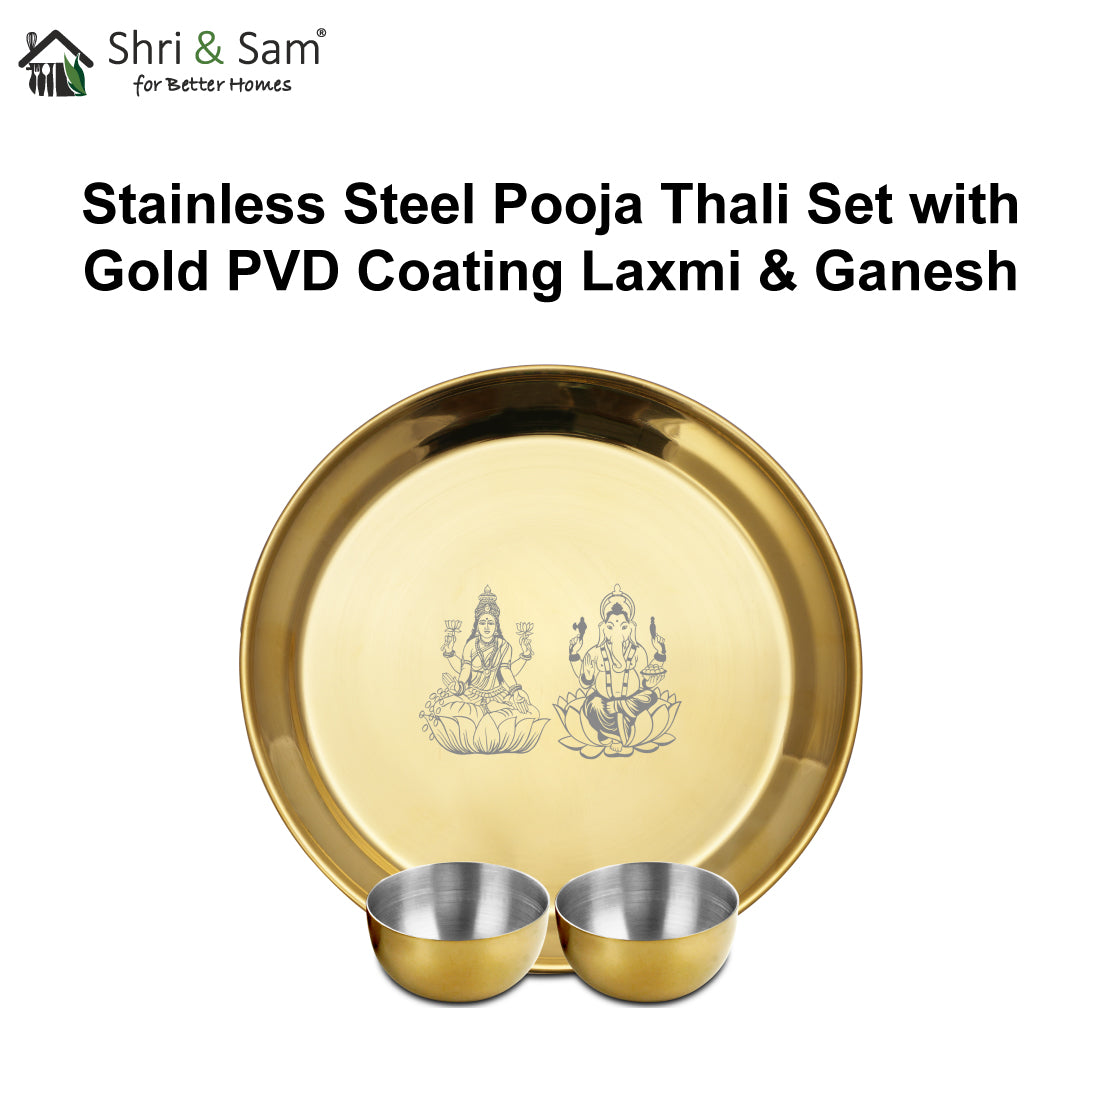 Stainless Steel Pooja Thali Set with Gold PVD Coating Laxmi & Ganesh